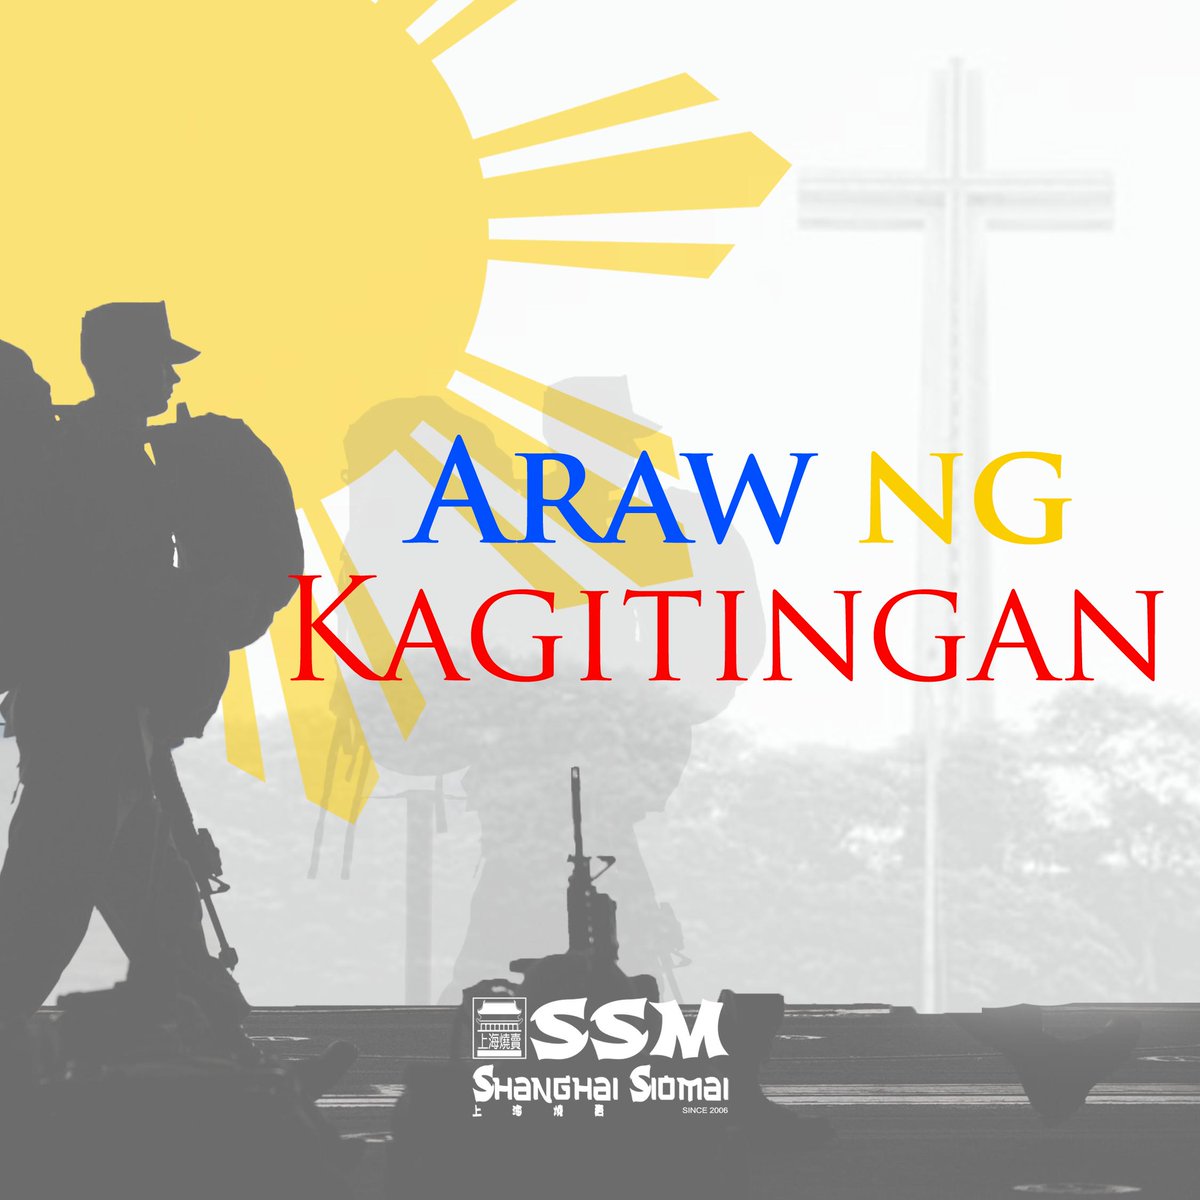 Maligayang Araw ng Kagitingan!🇵🇭

April 9 is a national holiday to commemorate our veterans who fought for our country's freedom during WWII.
#ArawNgKagitingan
#DayOfValor